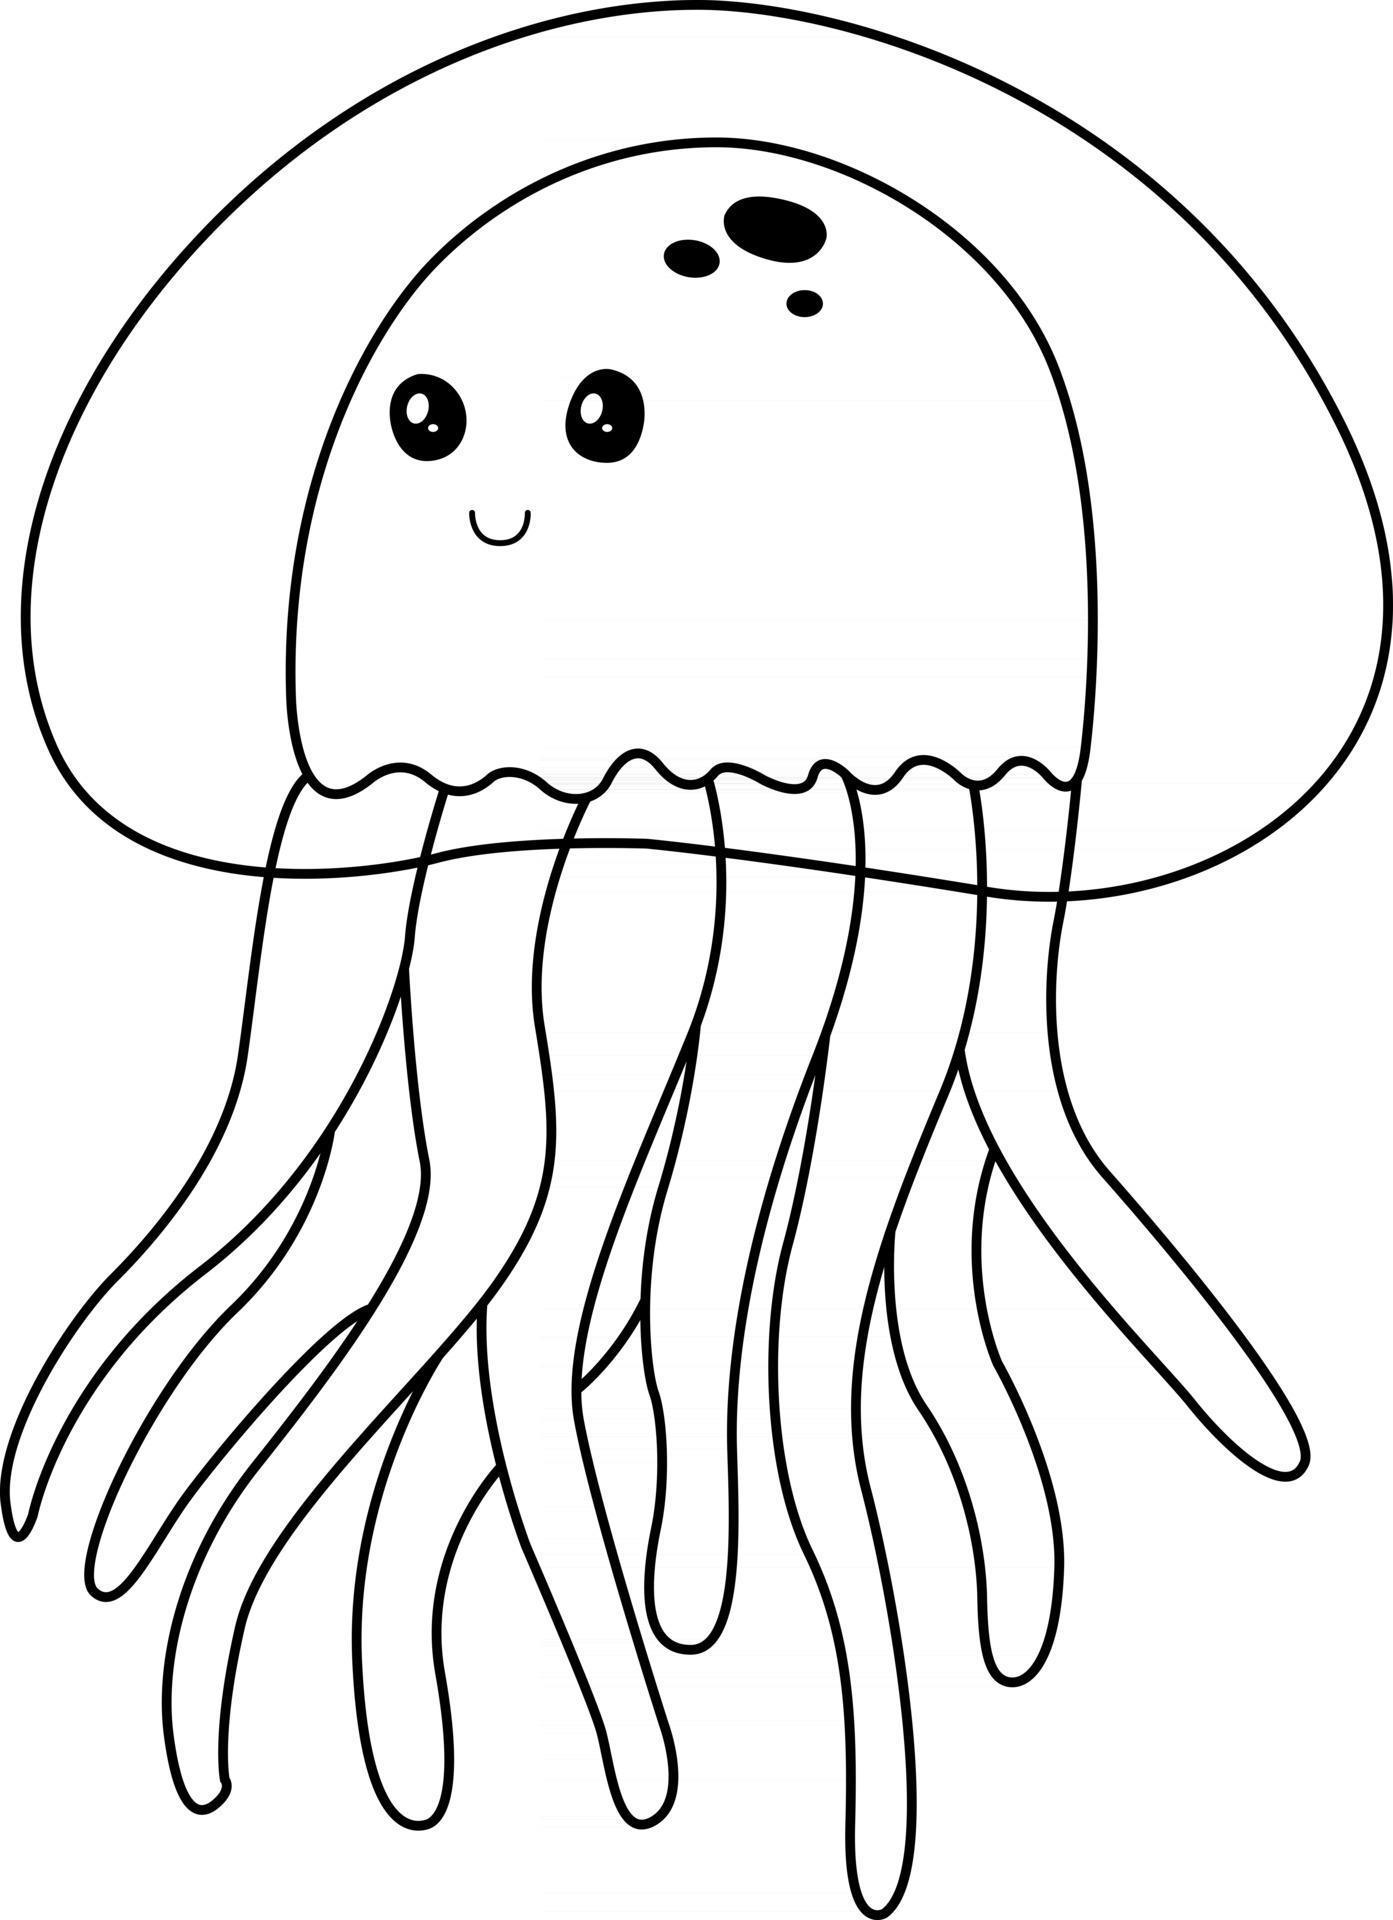 Jellyfish Kids Coloring Page Great for Beginner Coloring Book 2506064